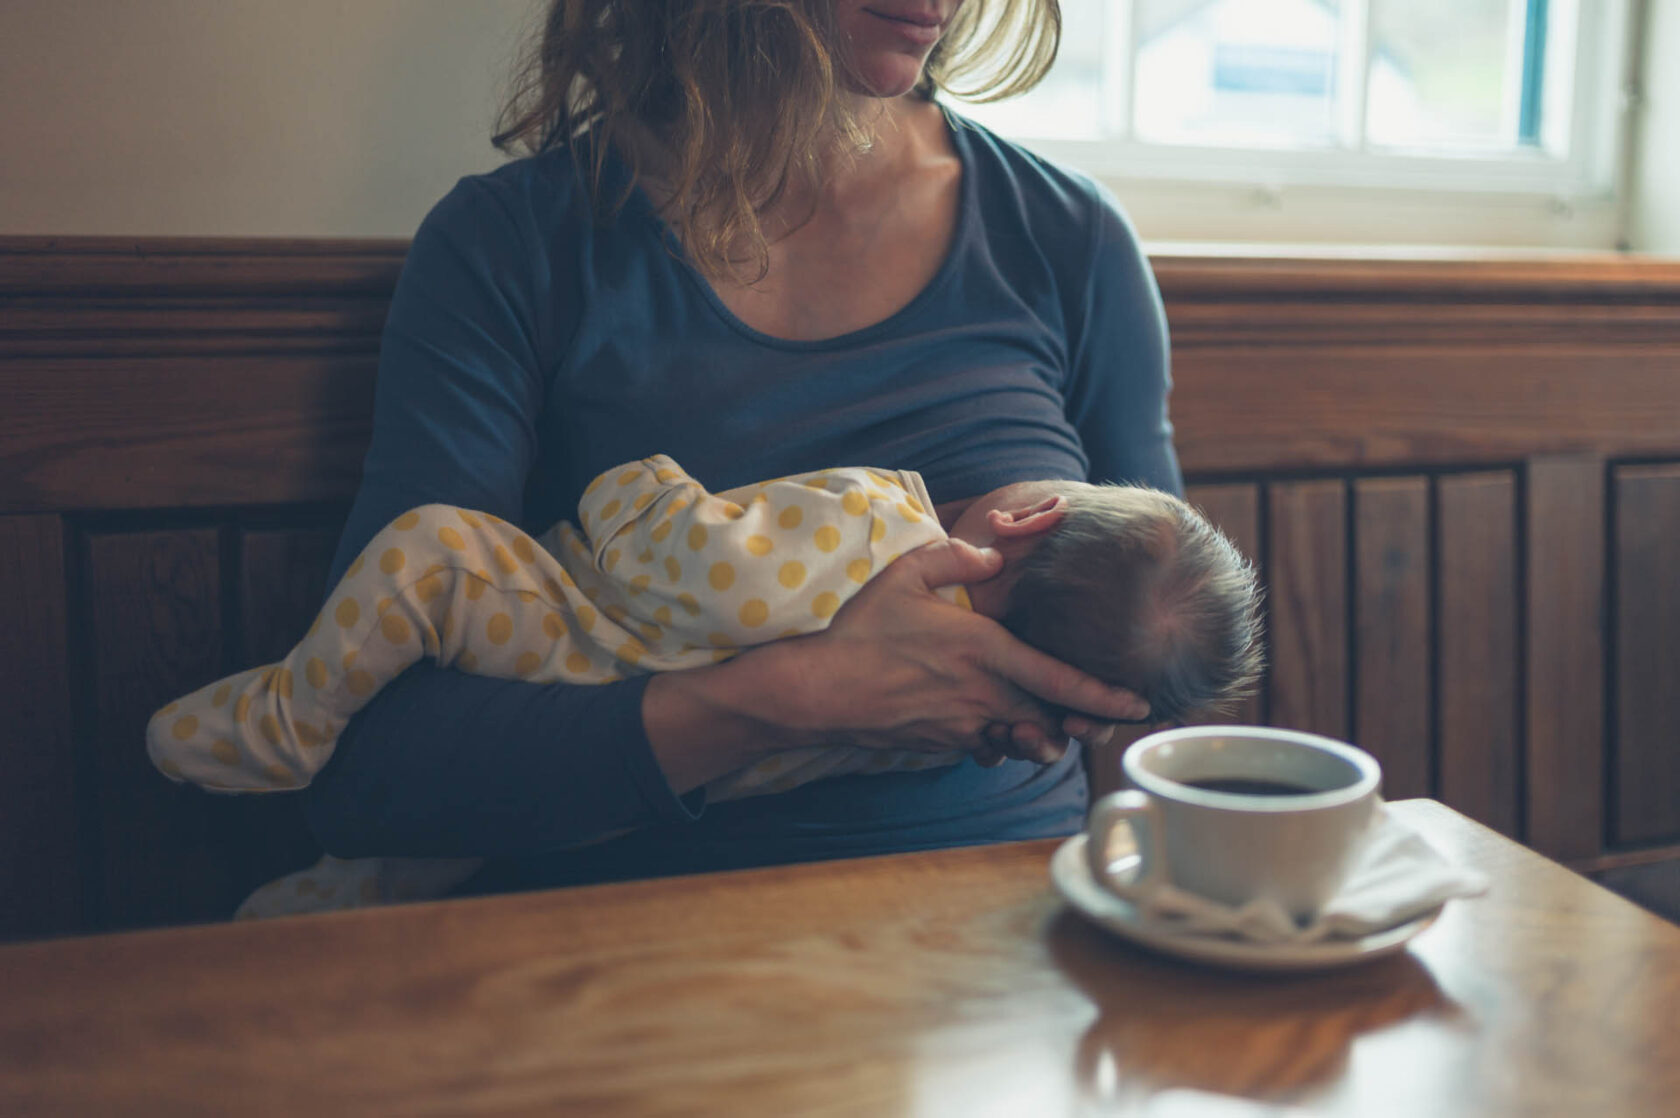 A,Young,Mother,Is,Breastfeeding,Her,Baby,In,A,Cafe